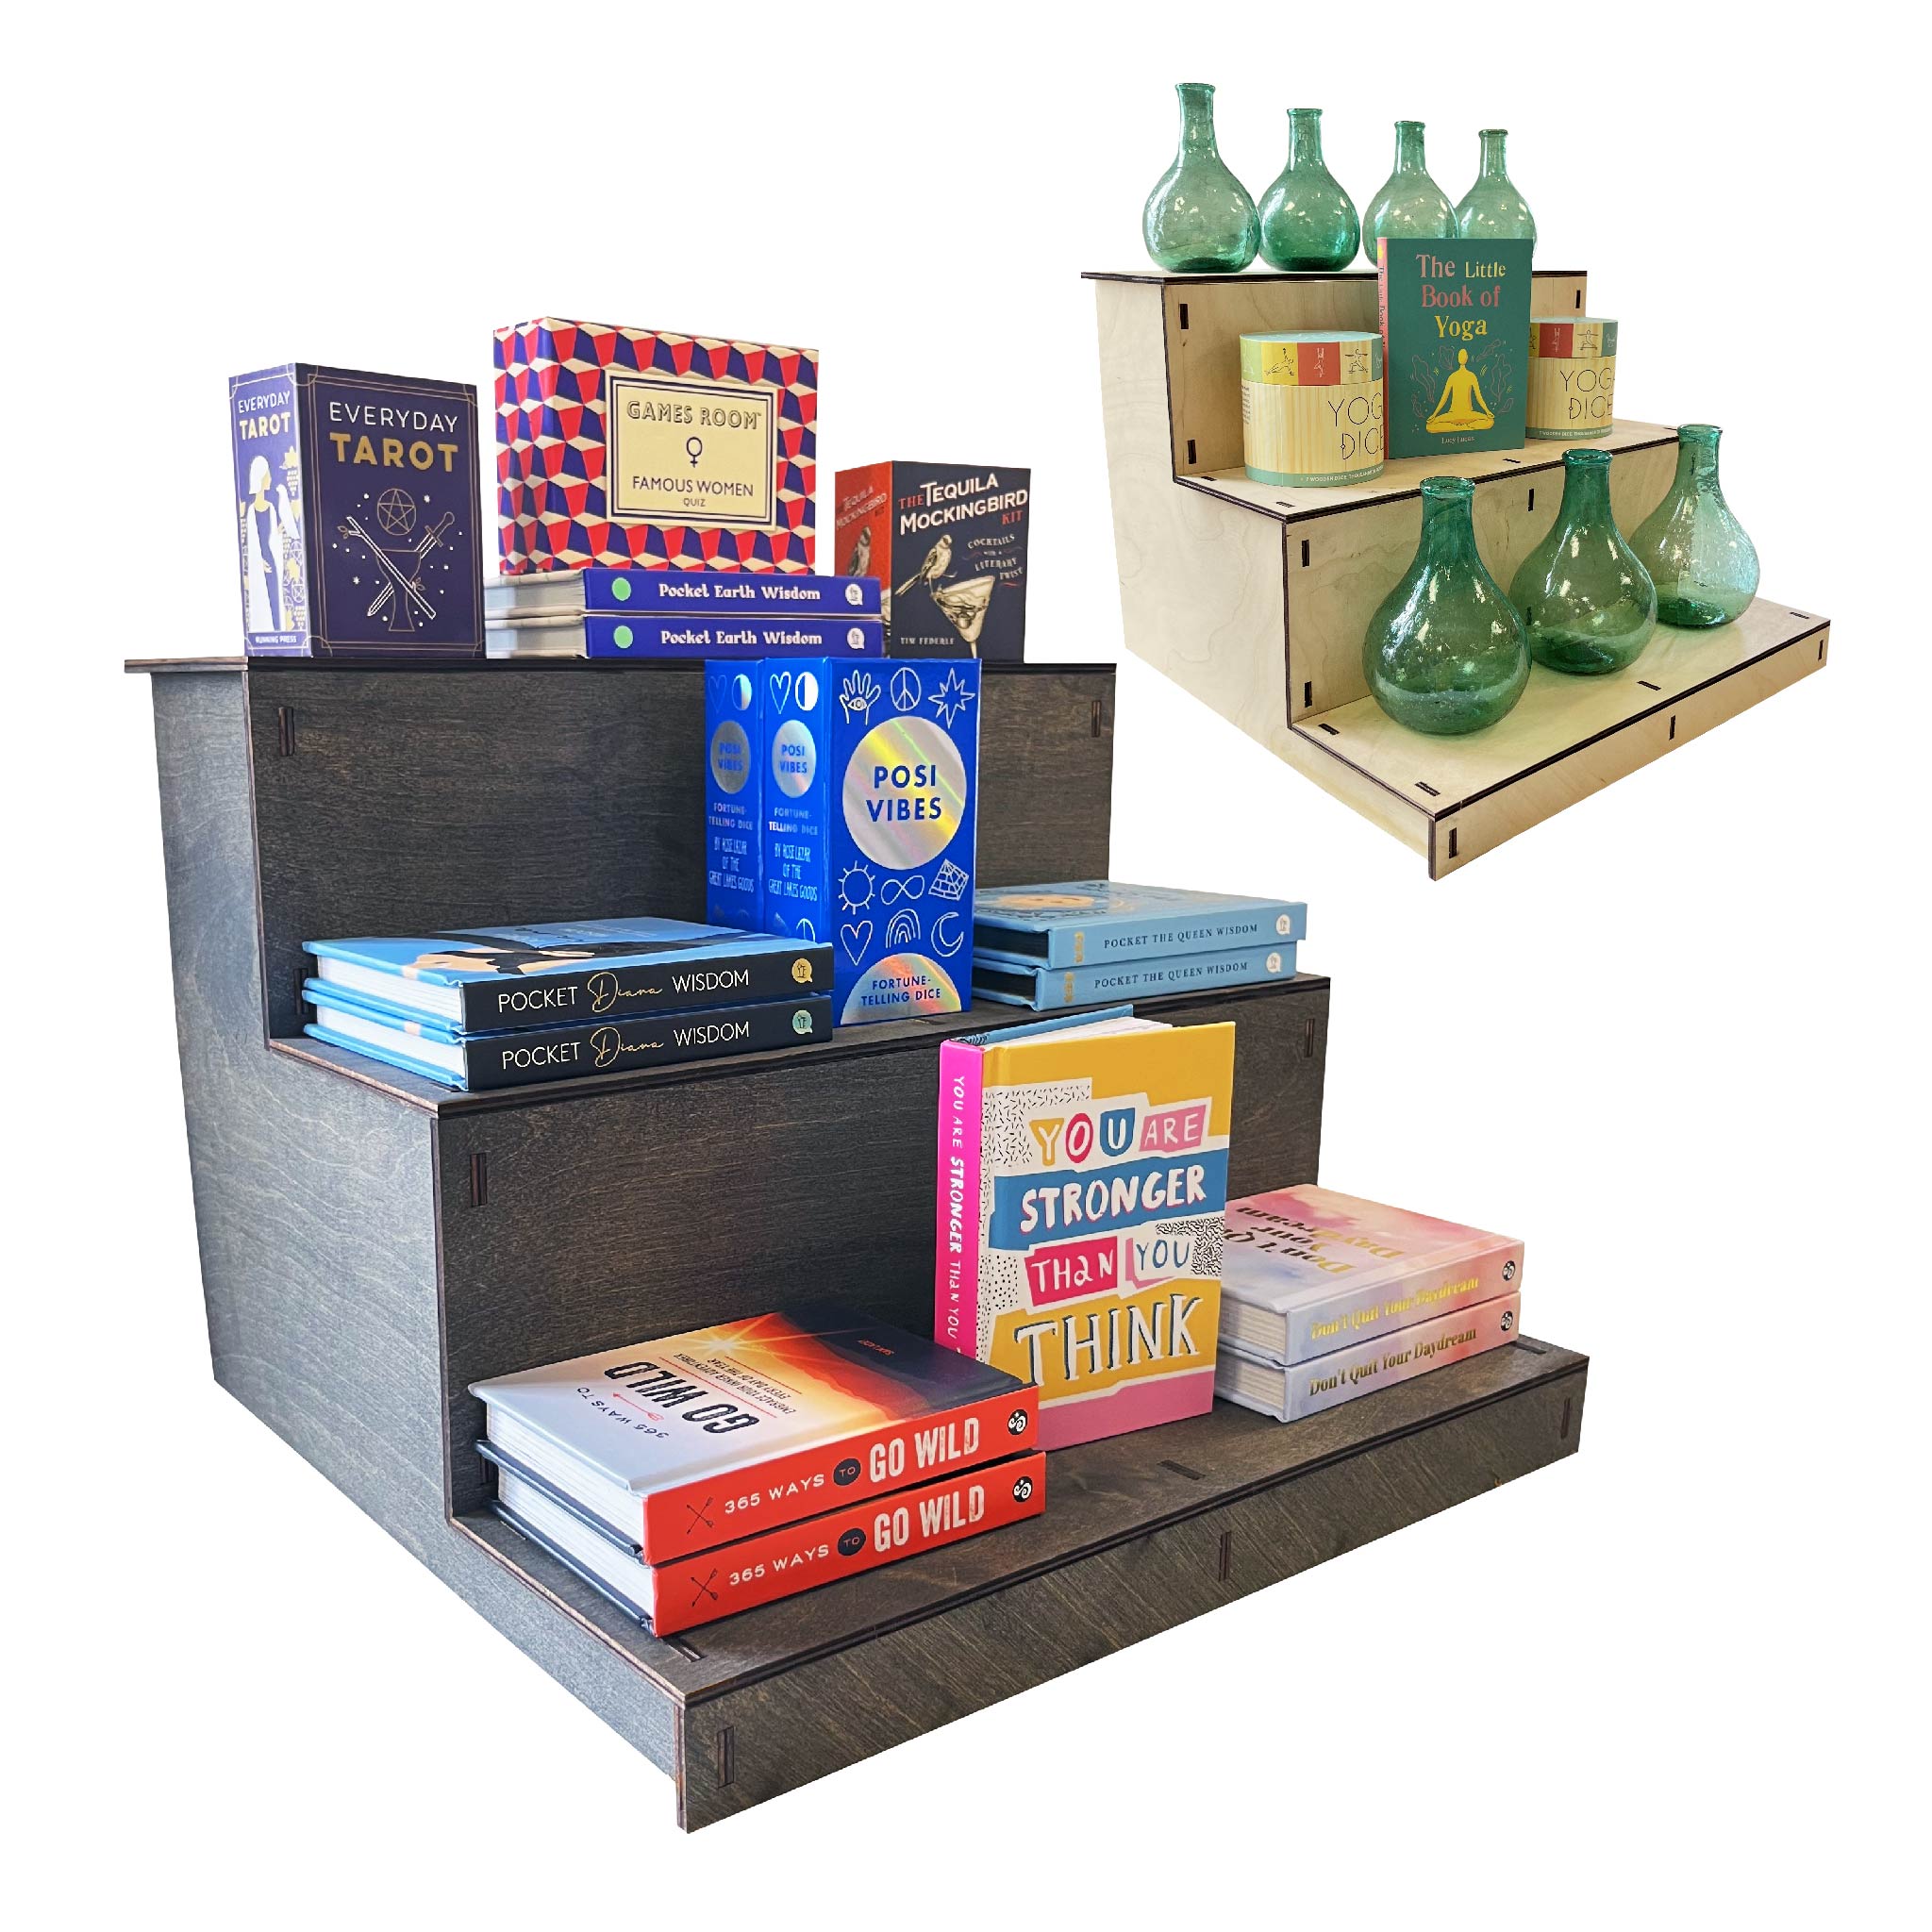 3-Tier Straight Wooden Retail Table Display Stand with Shelves for Products  - Portable | 3 Step Straight Display Rack for Retail Table Top, Counter